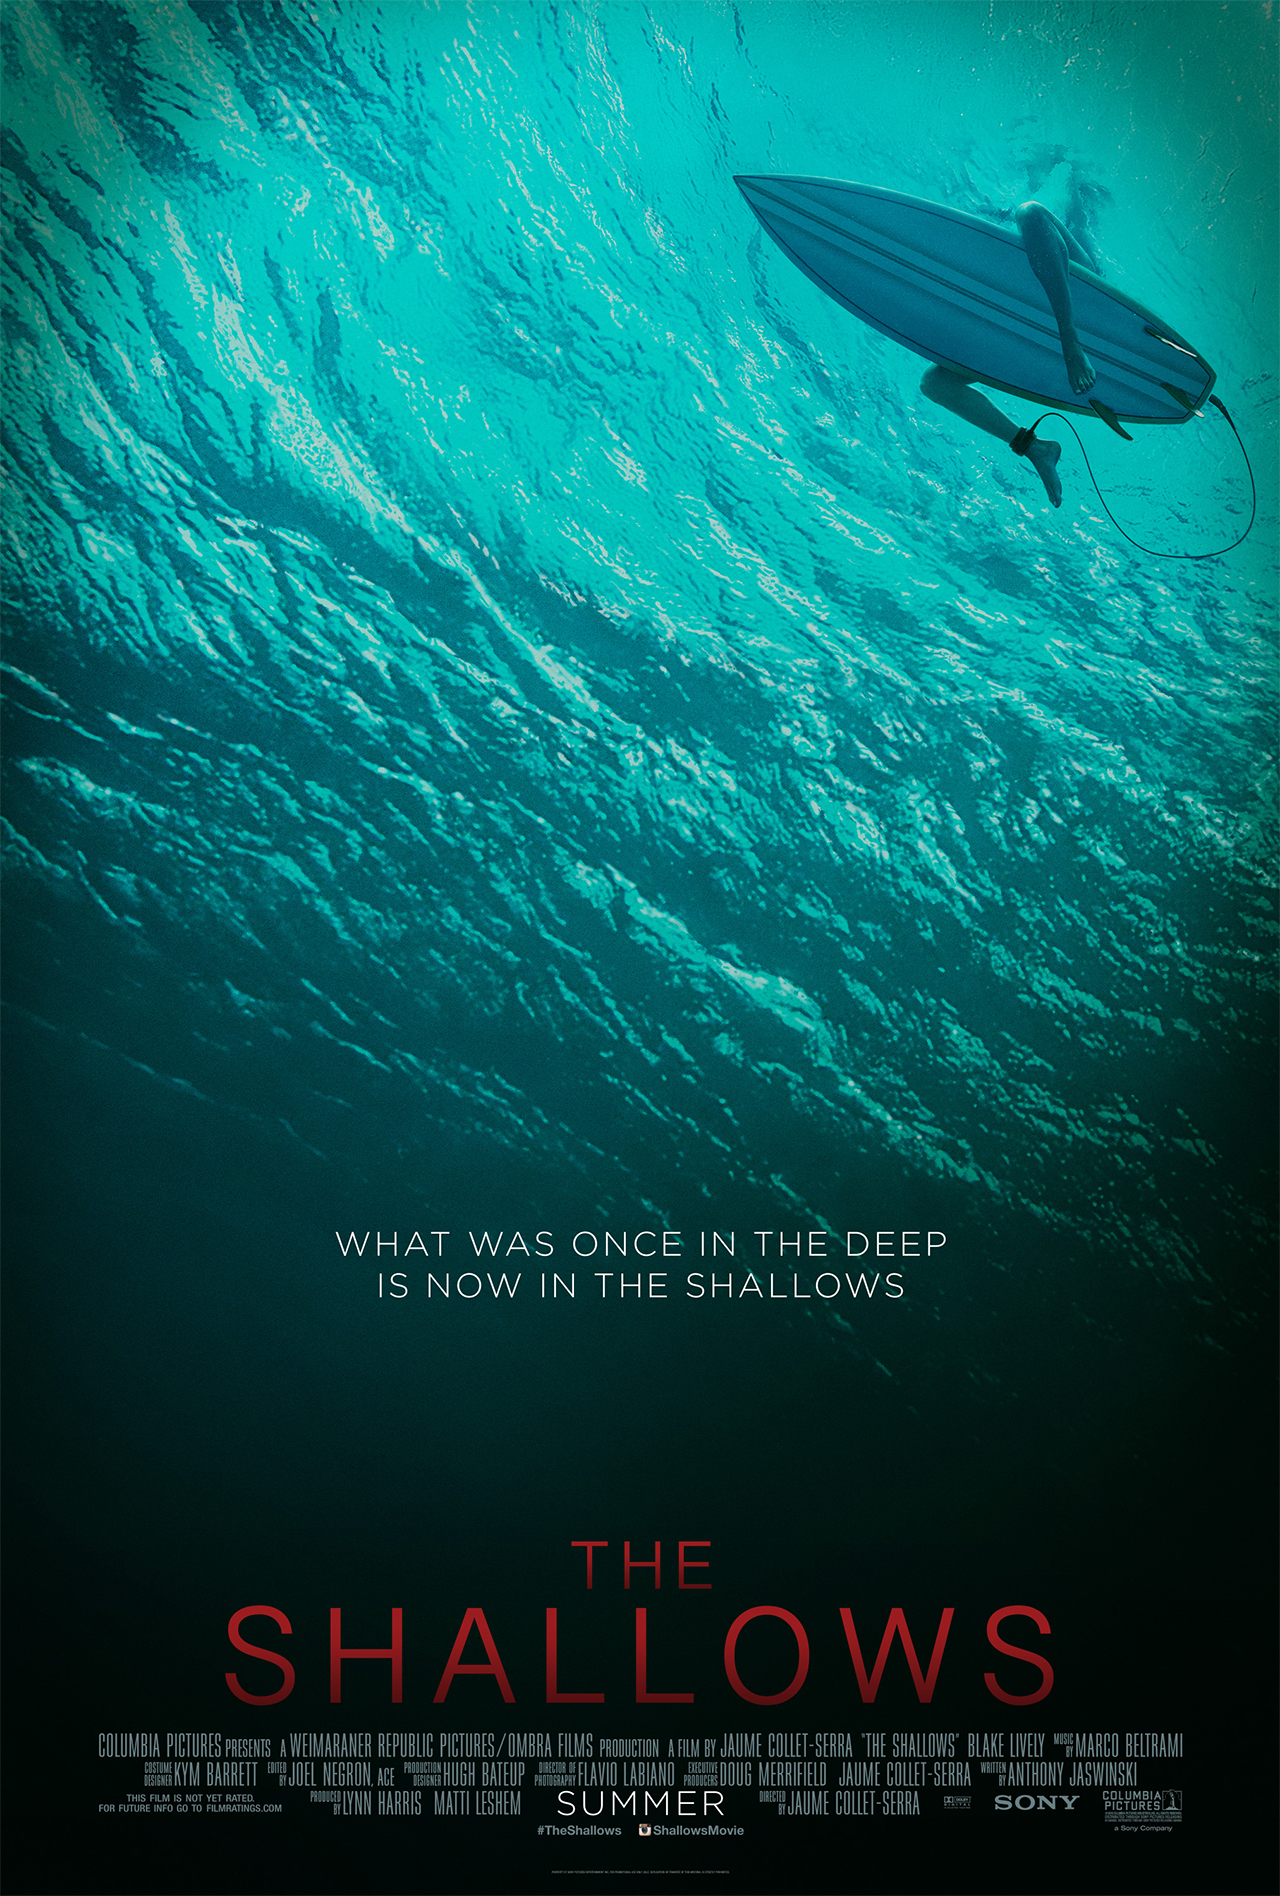 The Shallow movie poster